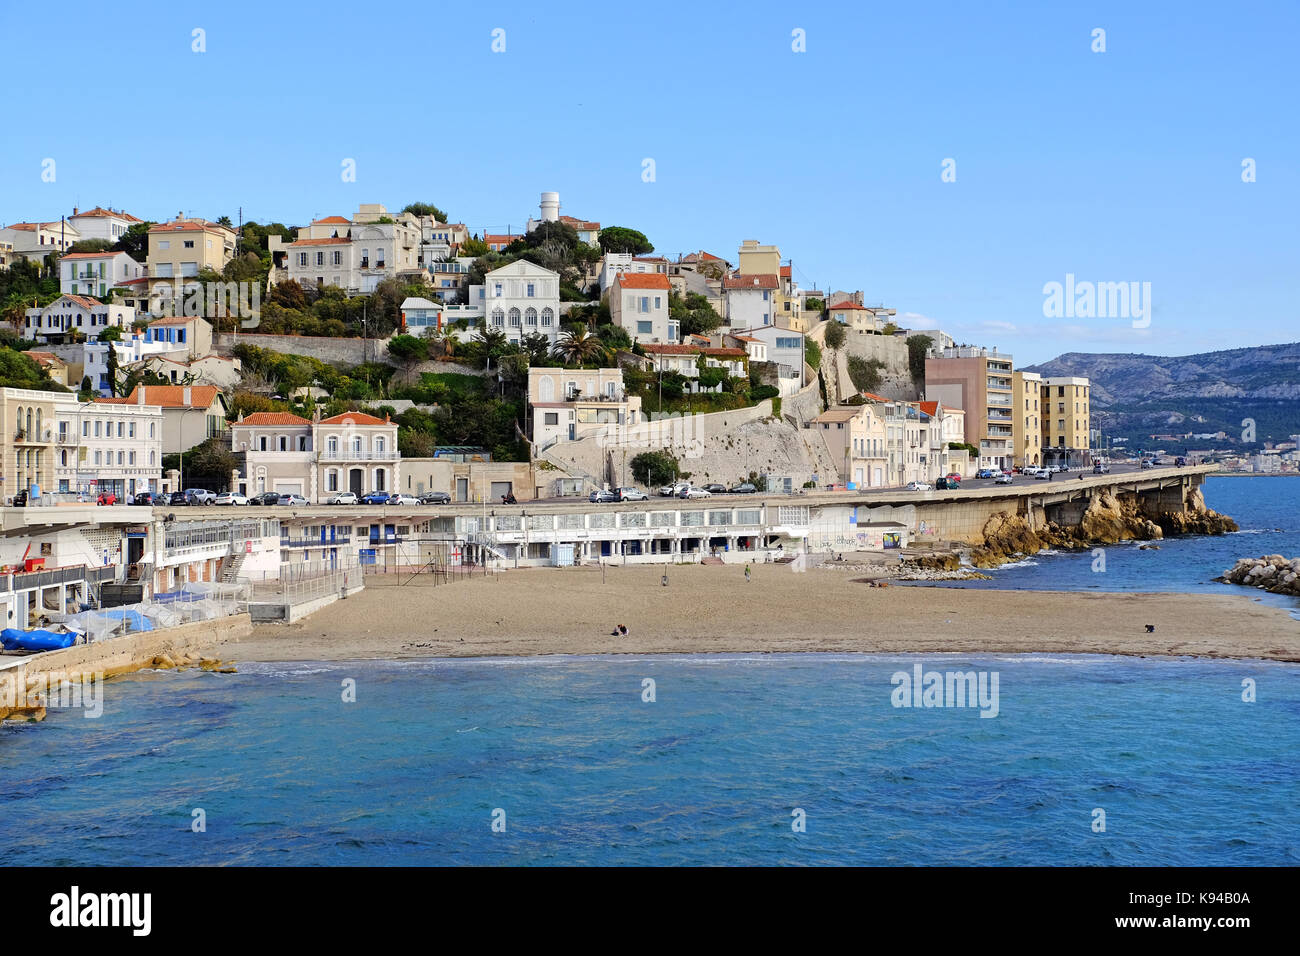 The Corniche road and beach along the Mediterranean sea in Marseilles, Provence, South of France Stock Photo